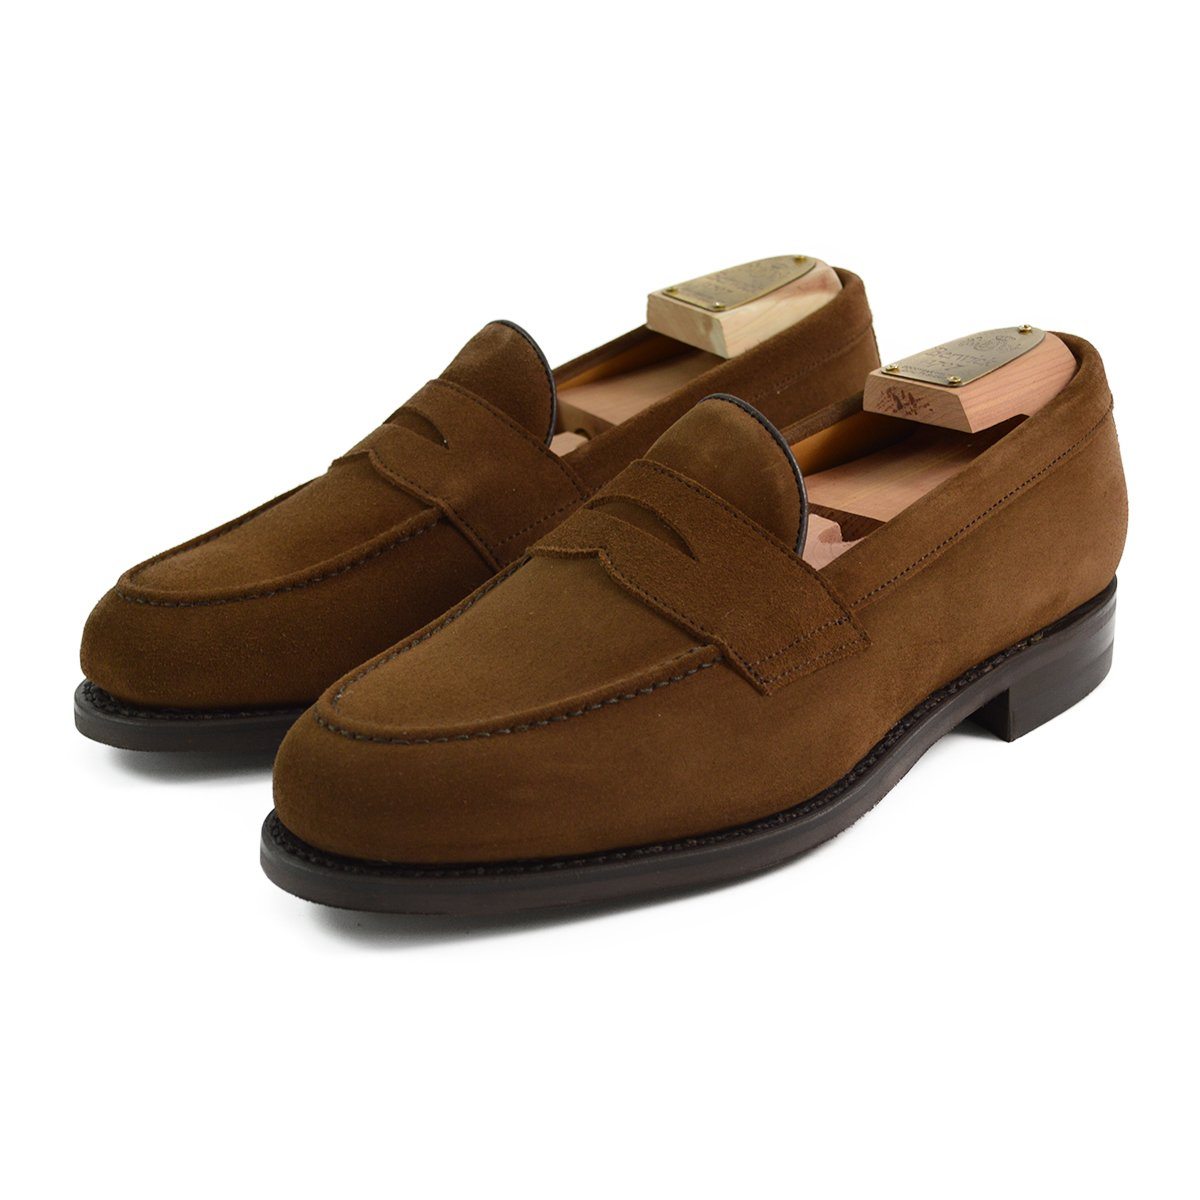 Berwick 1707 Penny Loafer (9628) - Snuff Suede Dainite – A Fine Pair of ...